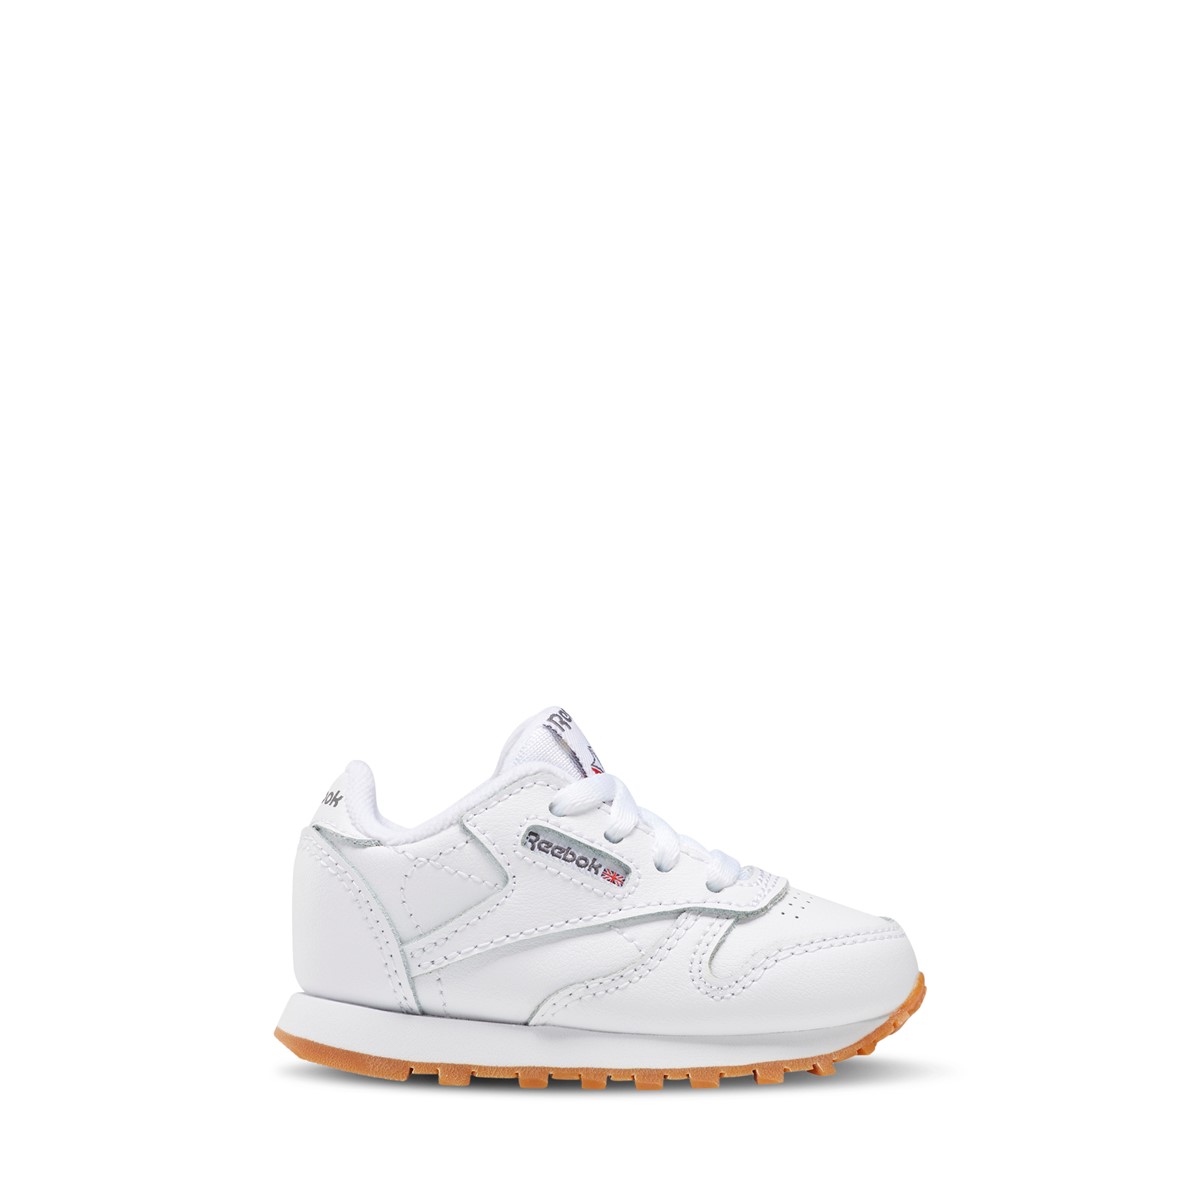 Toddler's Classic Leather Sneakers in White